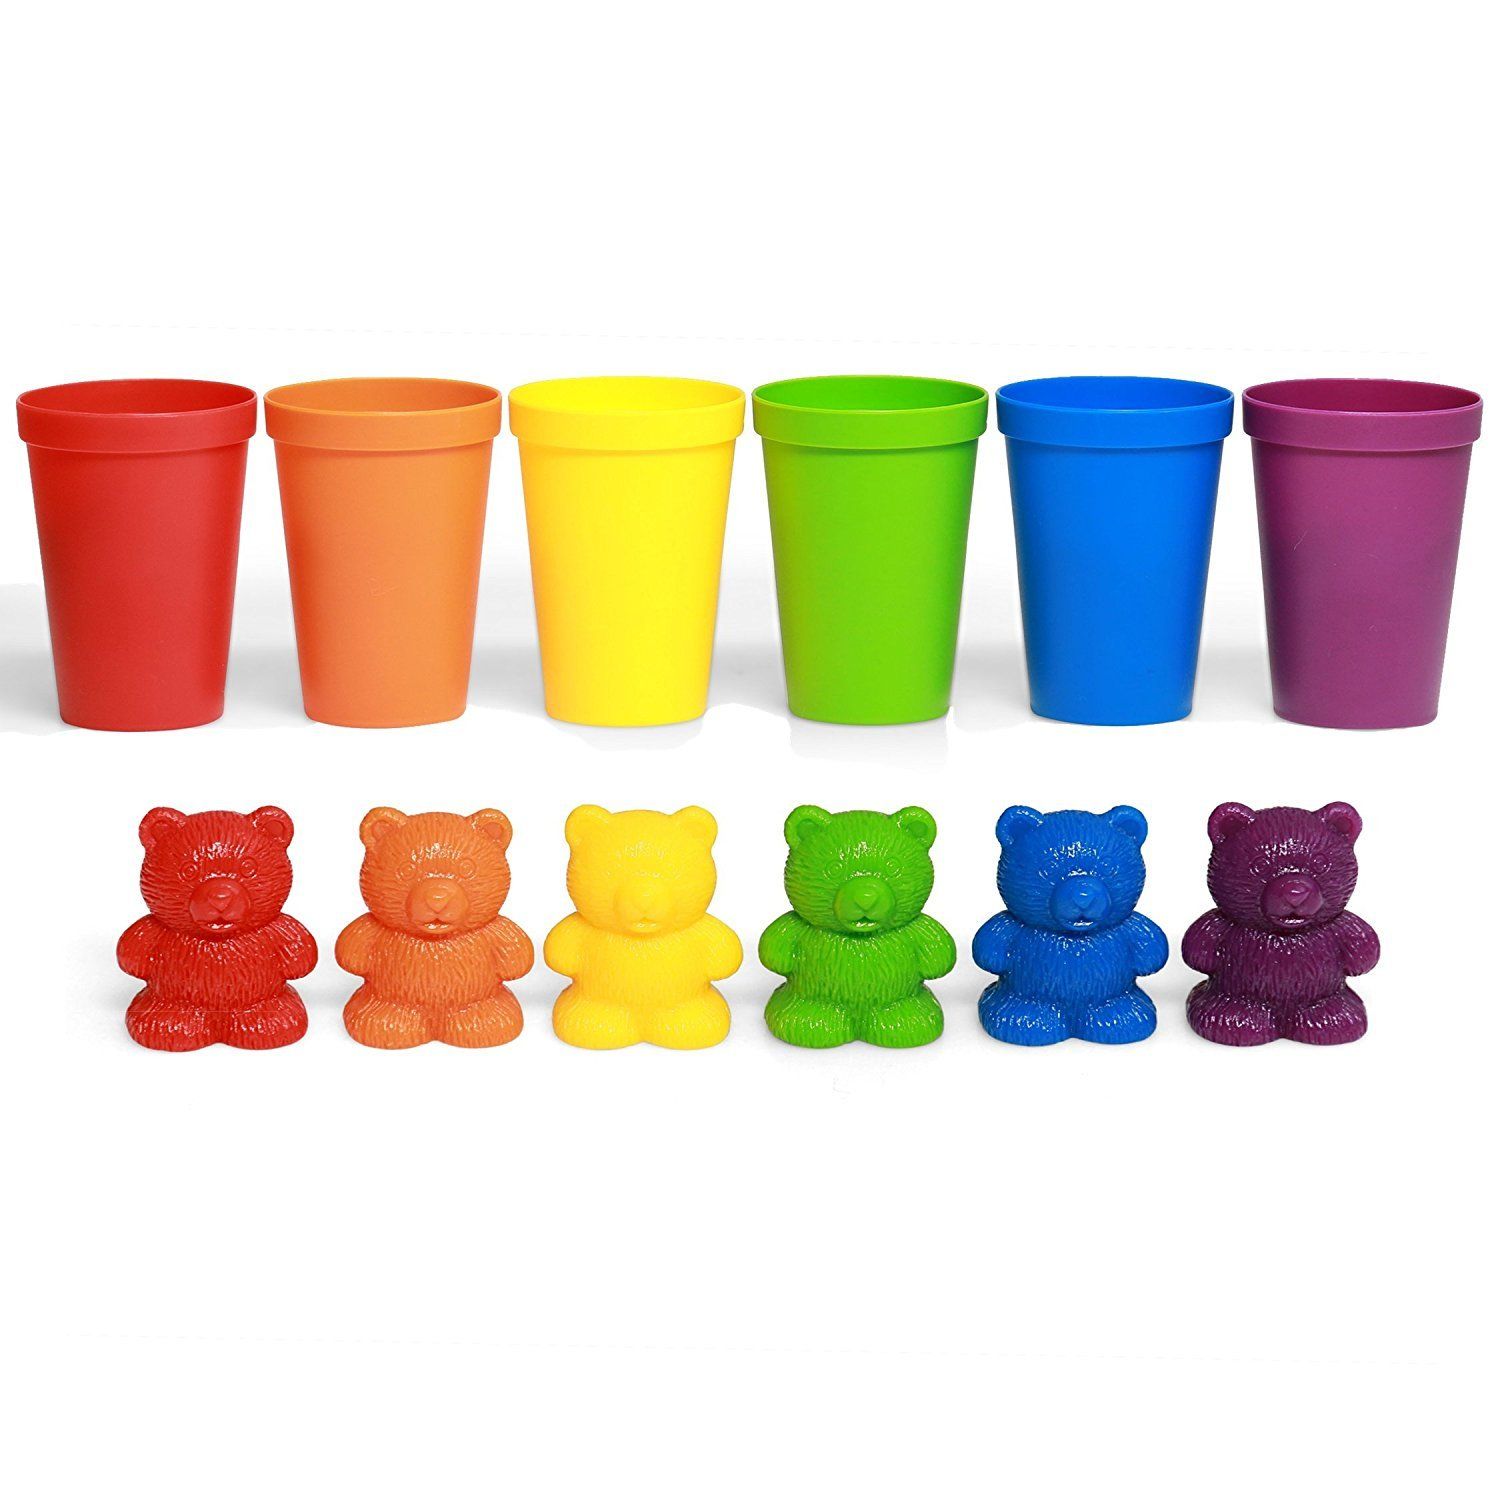 72 Rainbow Colored Counting Bears with Cups for Children, Montessori Toddler Learning Toys, Color... | Walmart (US)